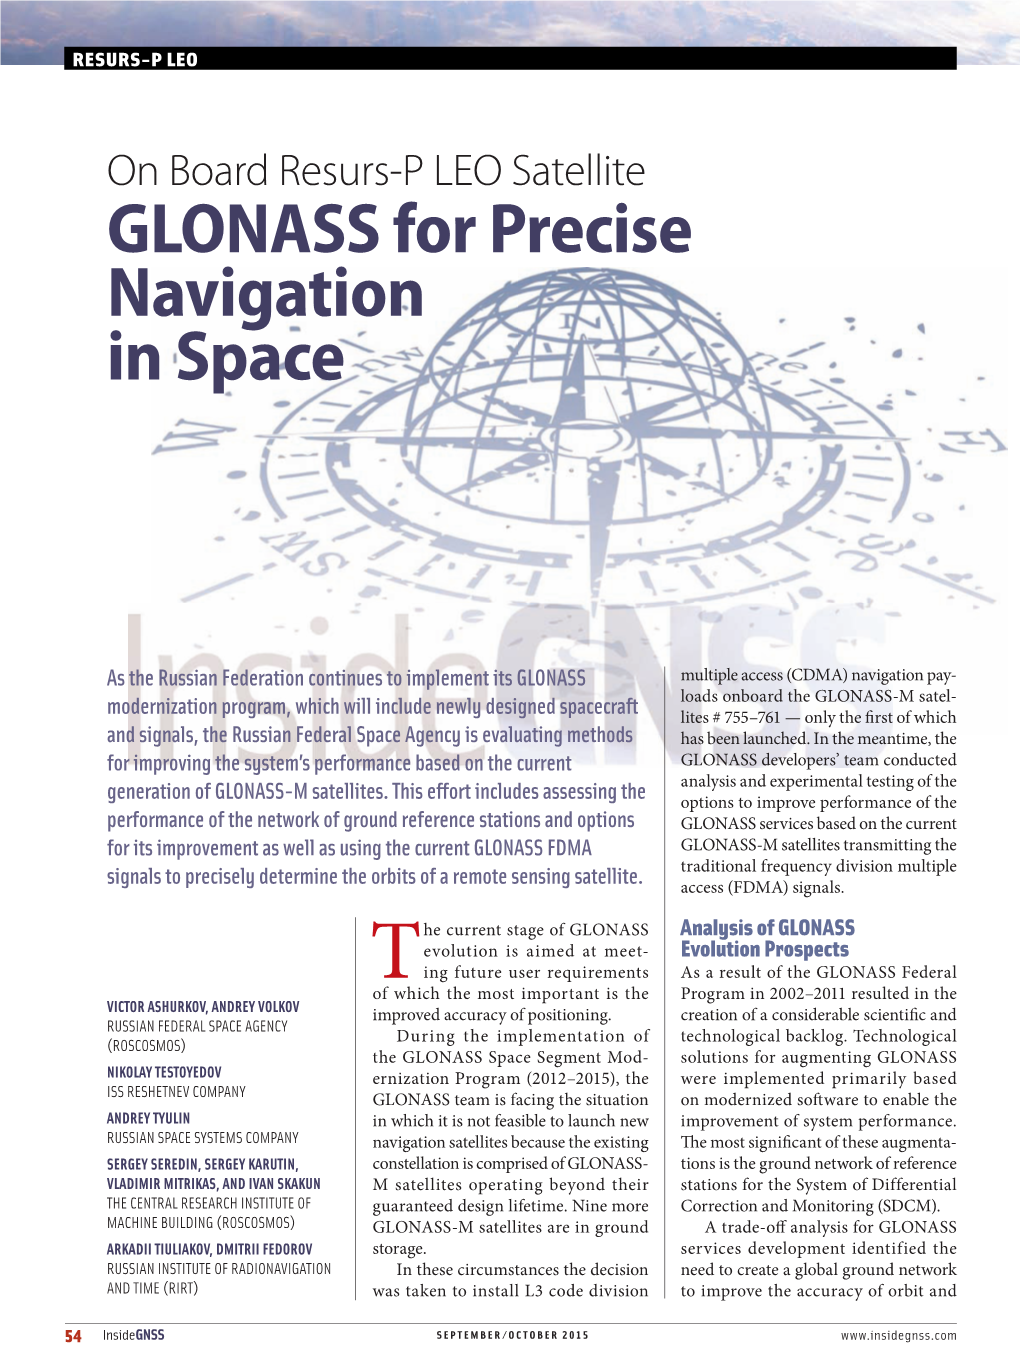 GLONASS for Precise Navigation in Space